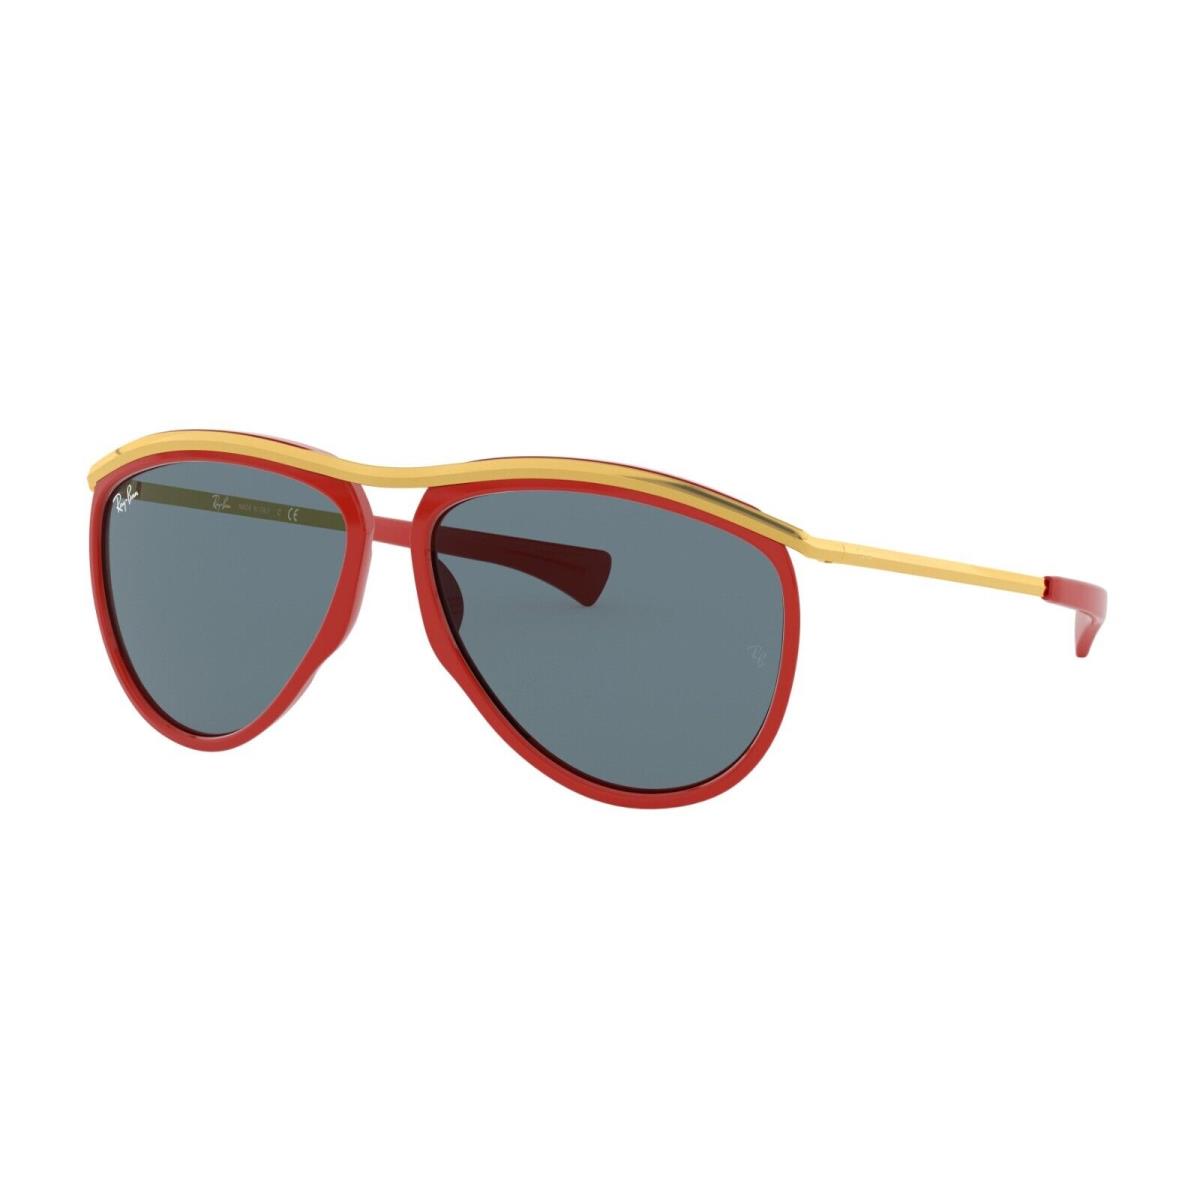 Ray Ban RB 2219 Olympian Aviator 1243/R5 Polished Red-gold/blue 59mm - Frame: Polished Red-Gold, Lens: Blue